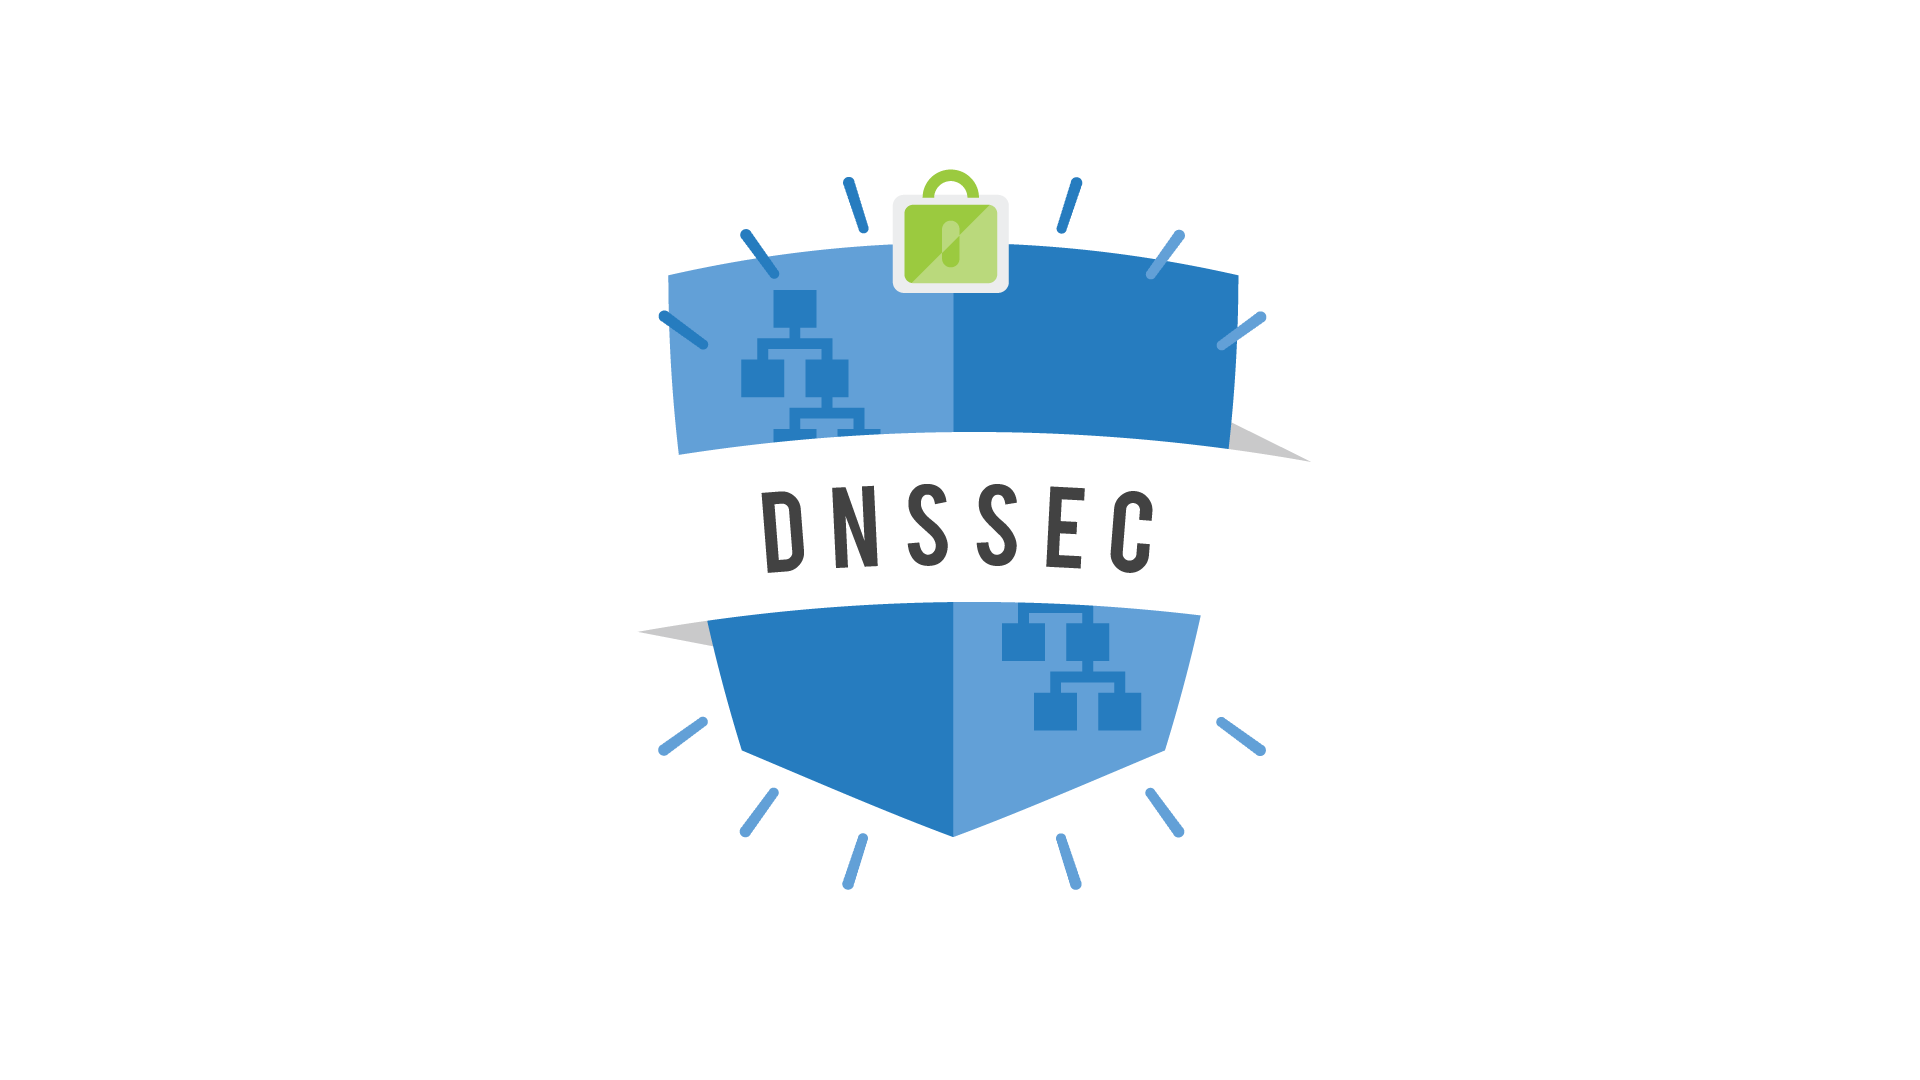 Systemd-resolve is used in most systemd distributions. DNSSEC checking is disabled by default, so here is a quick tutorial to enable it.